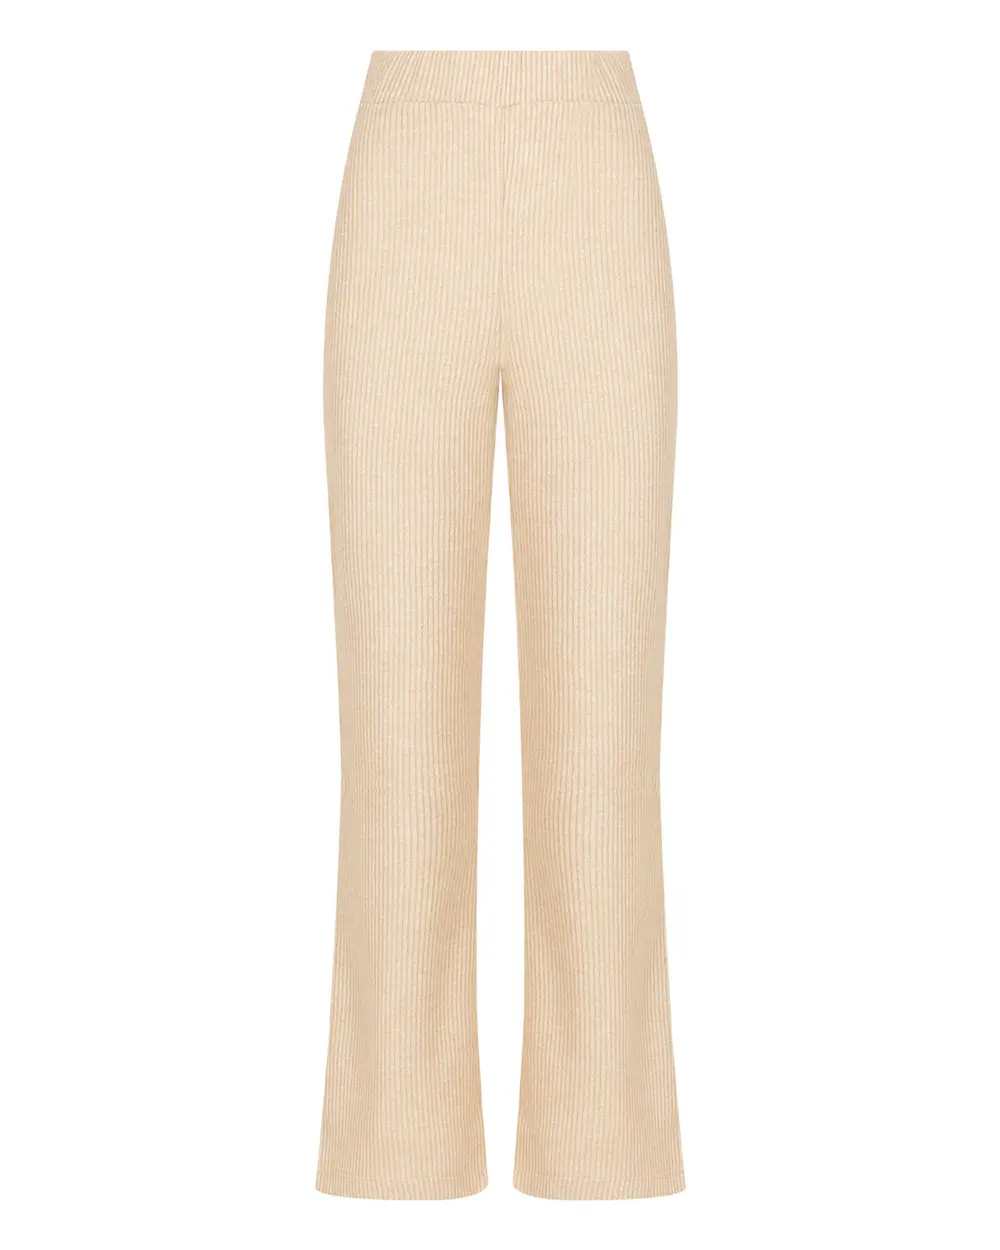 Knitted Fabric Full Length Trousers